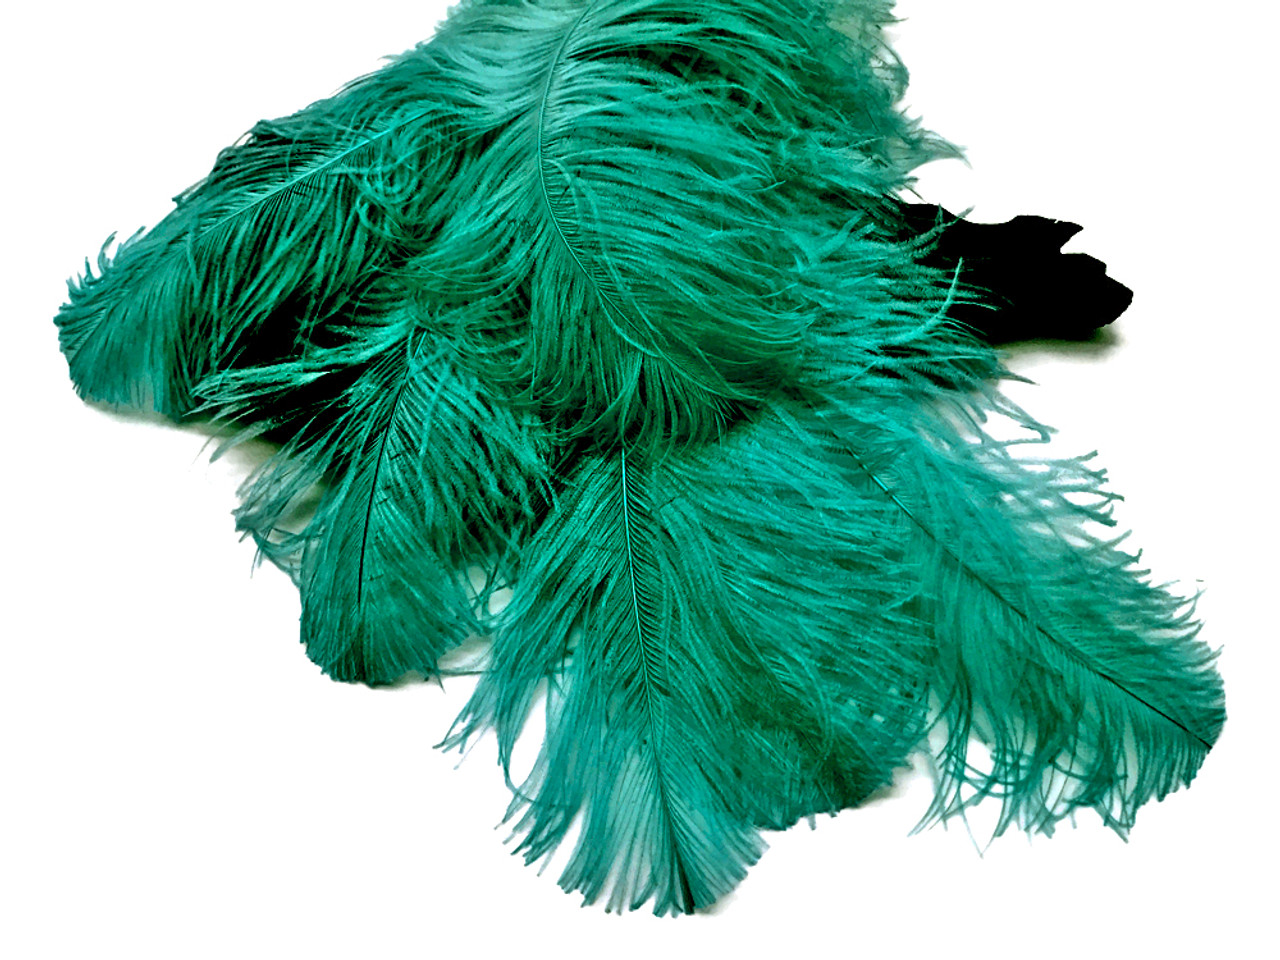 1/2 lb. - 18-24 Teal Green Large Wing Plumes Wholesale Feathers